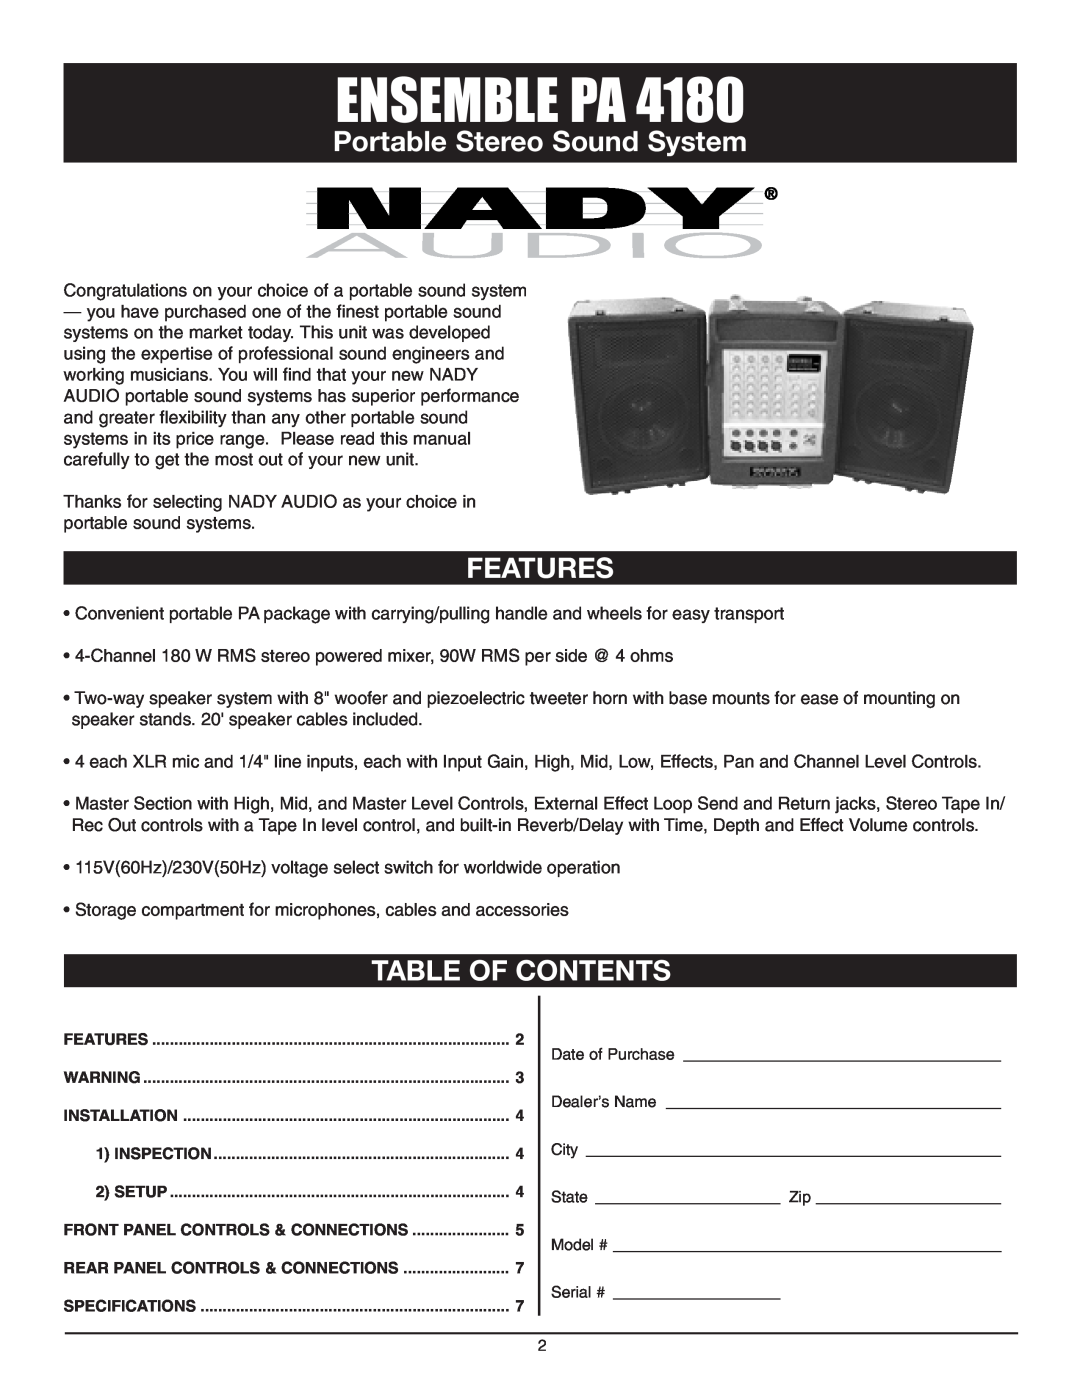 Nady Systems 4180 owner manual Portable Stereo Sound System, Features, Table Of Contents, Ensemble Pa 